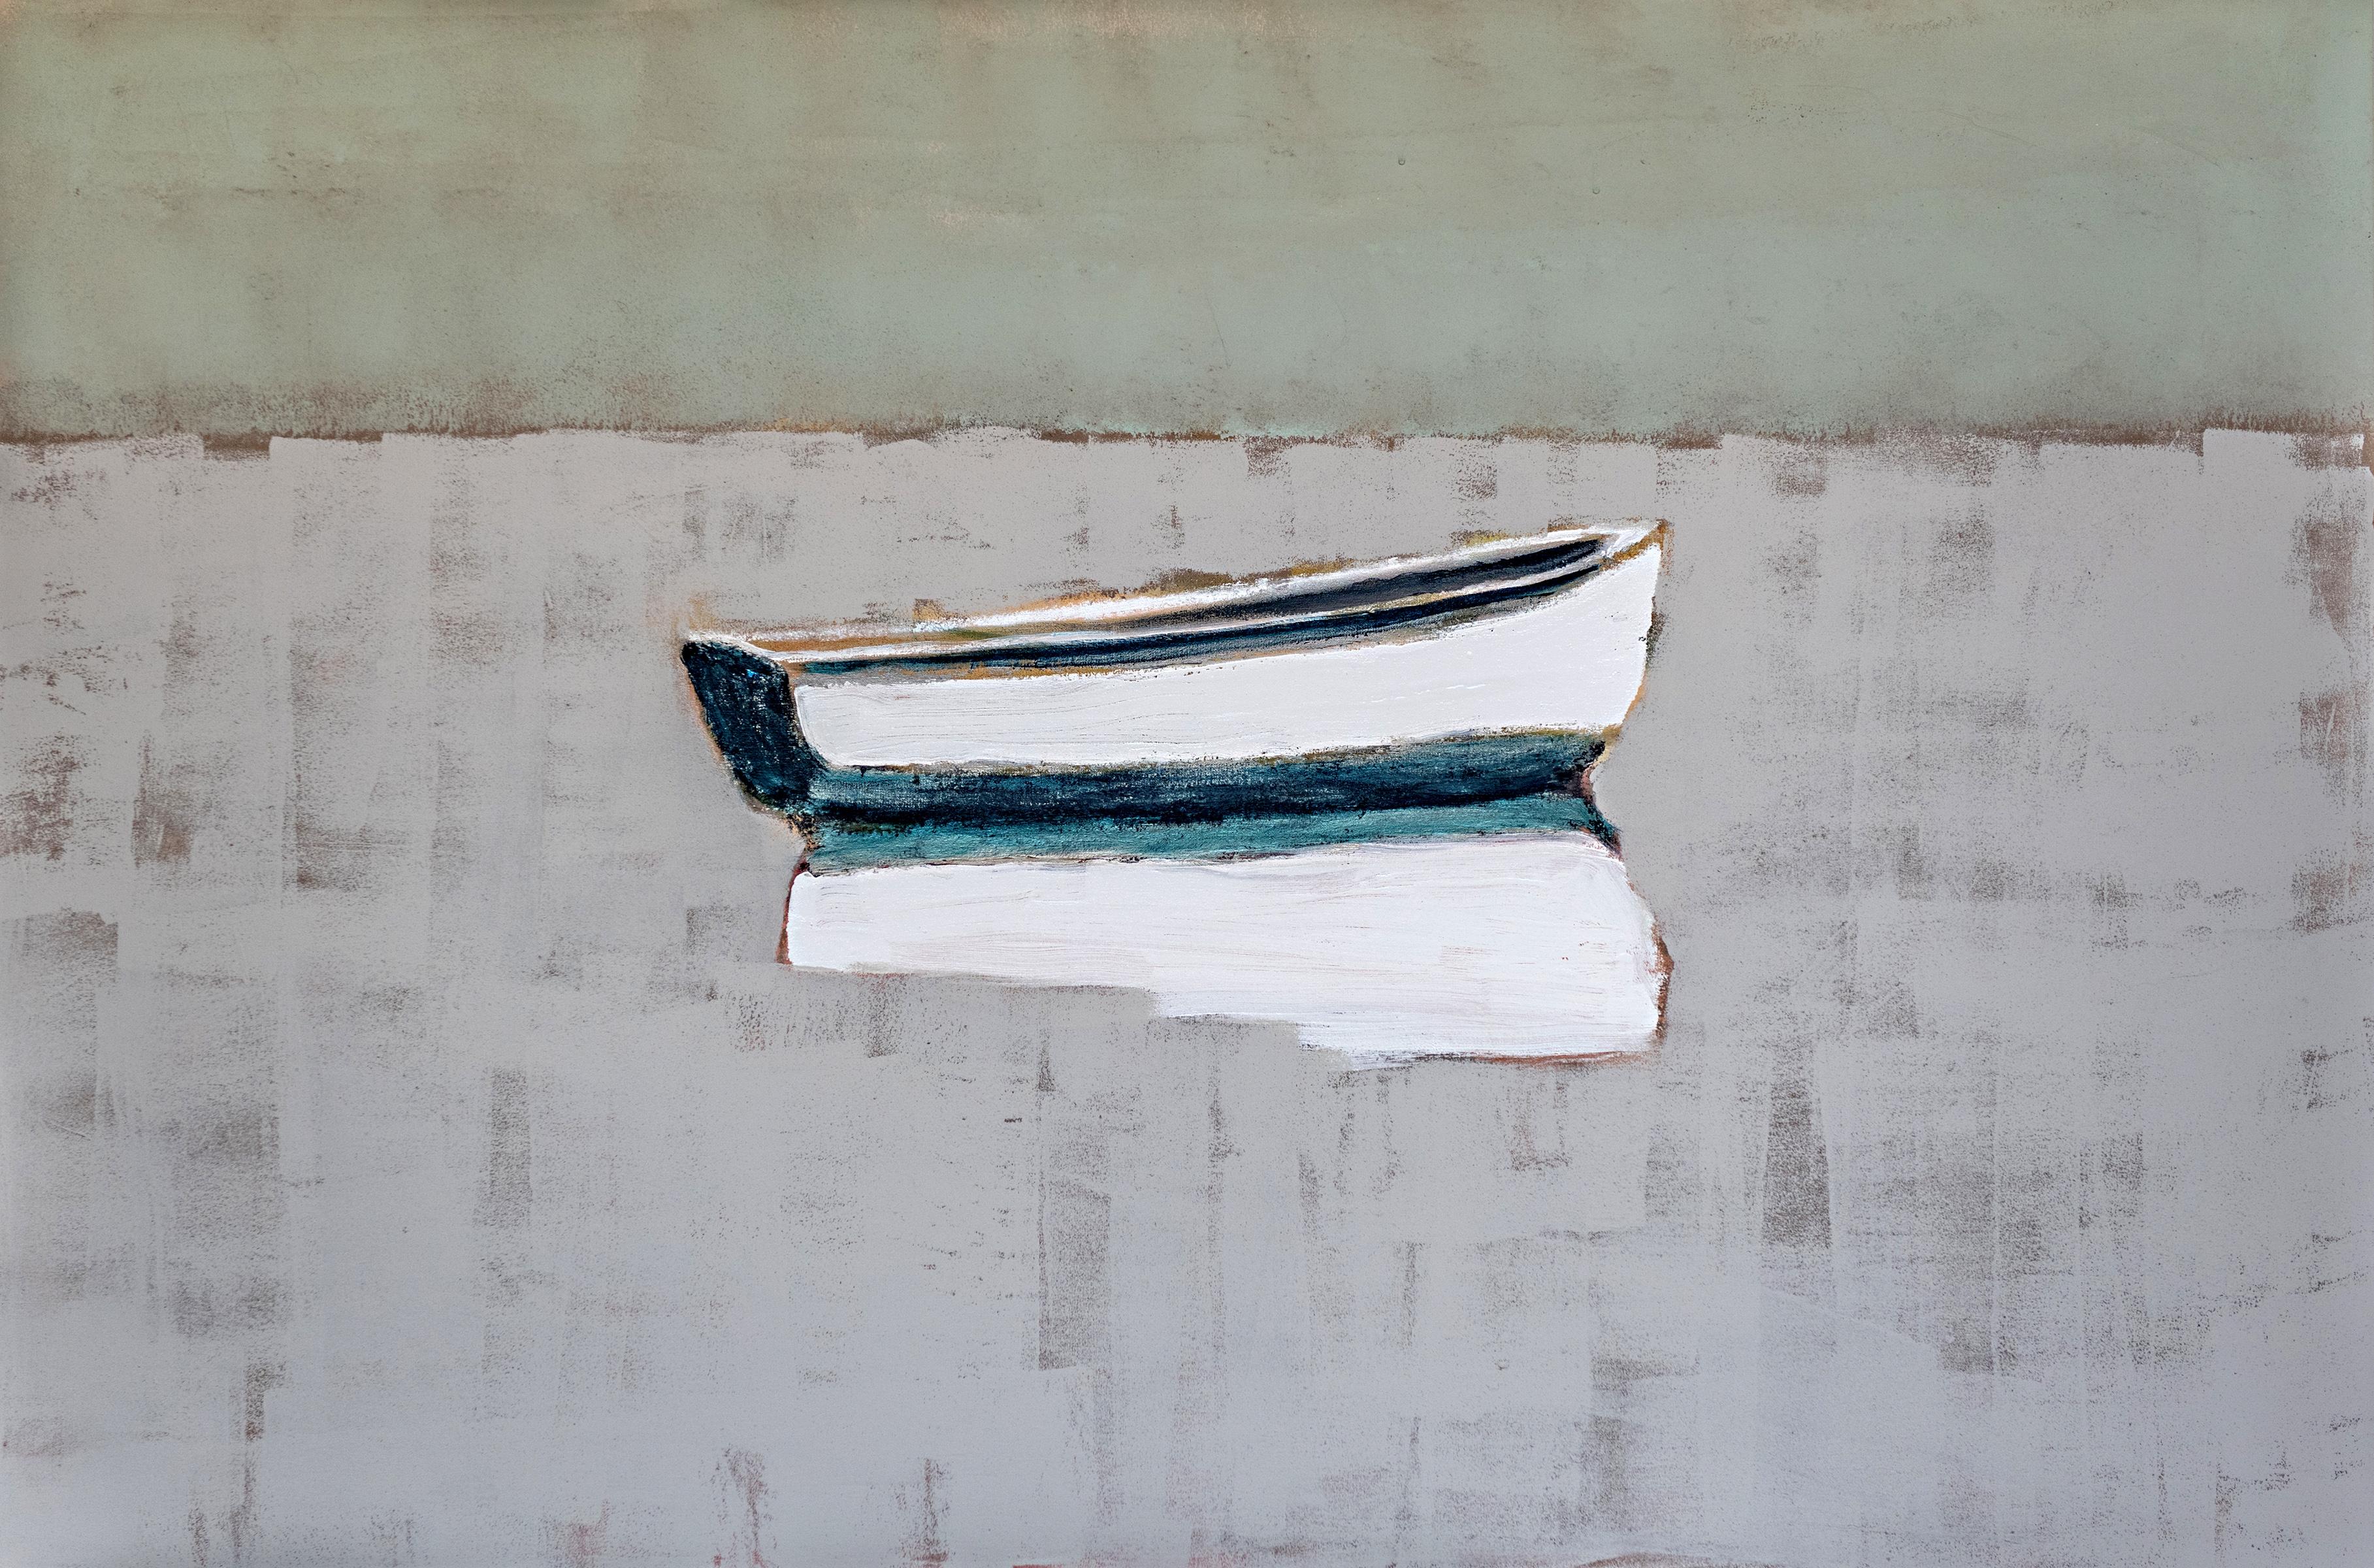 'Still the One' is a large horizontal mixed media on canvas boat painting created by American artist Carylon Killebrew in 2019. Featuring a palette made of white, grey, a touch of orange and blue tones, the painting centers our attention on a simple